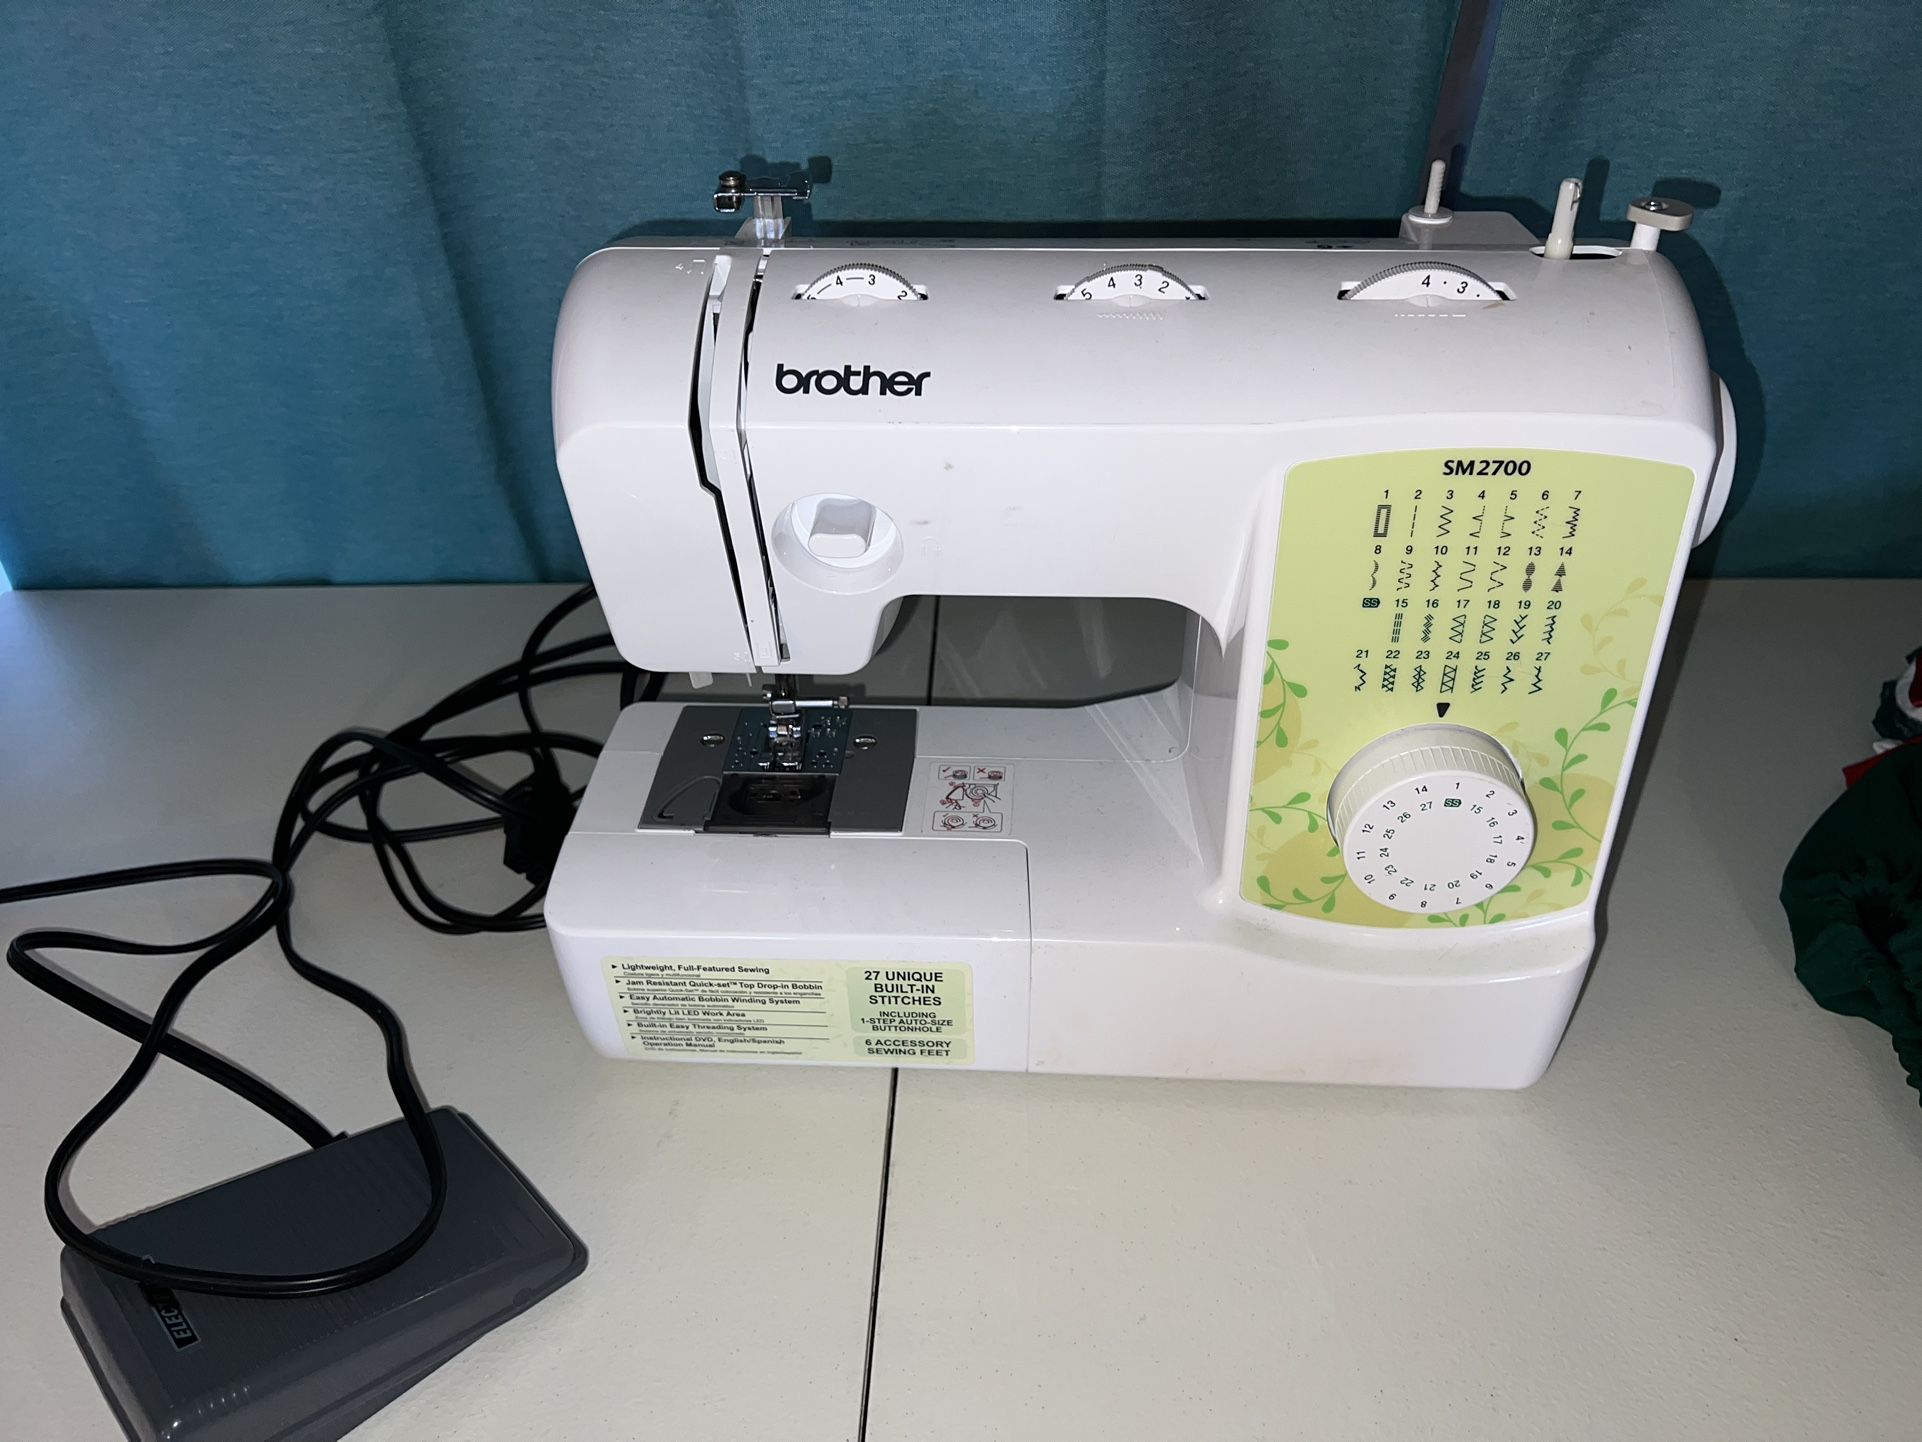 Brother SM2700 Sewing Machine $30